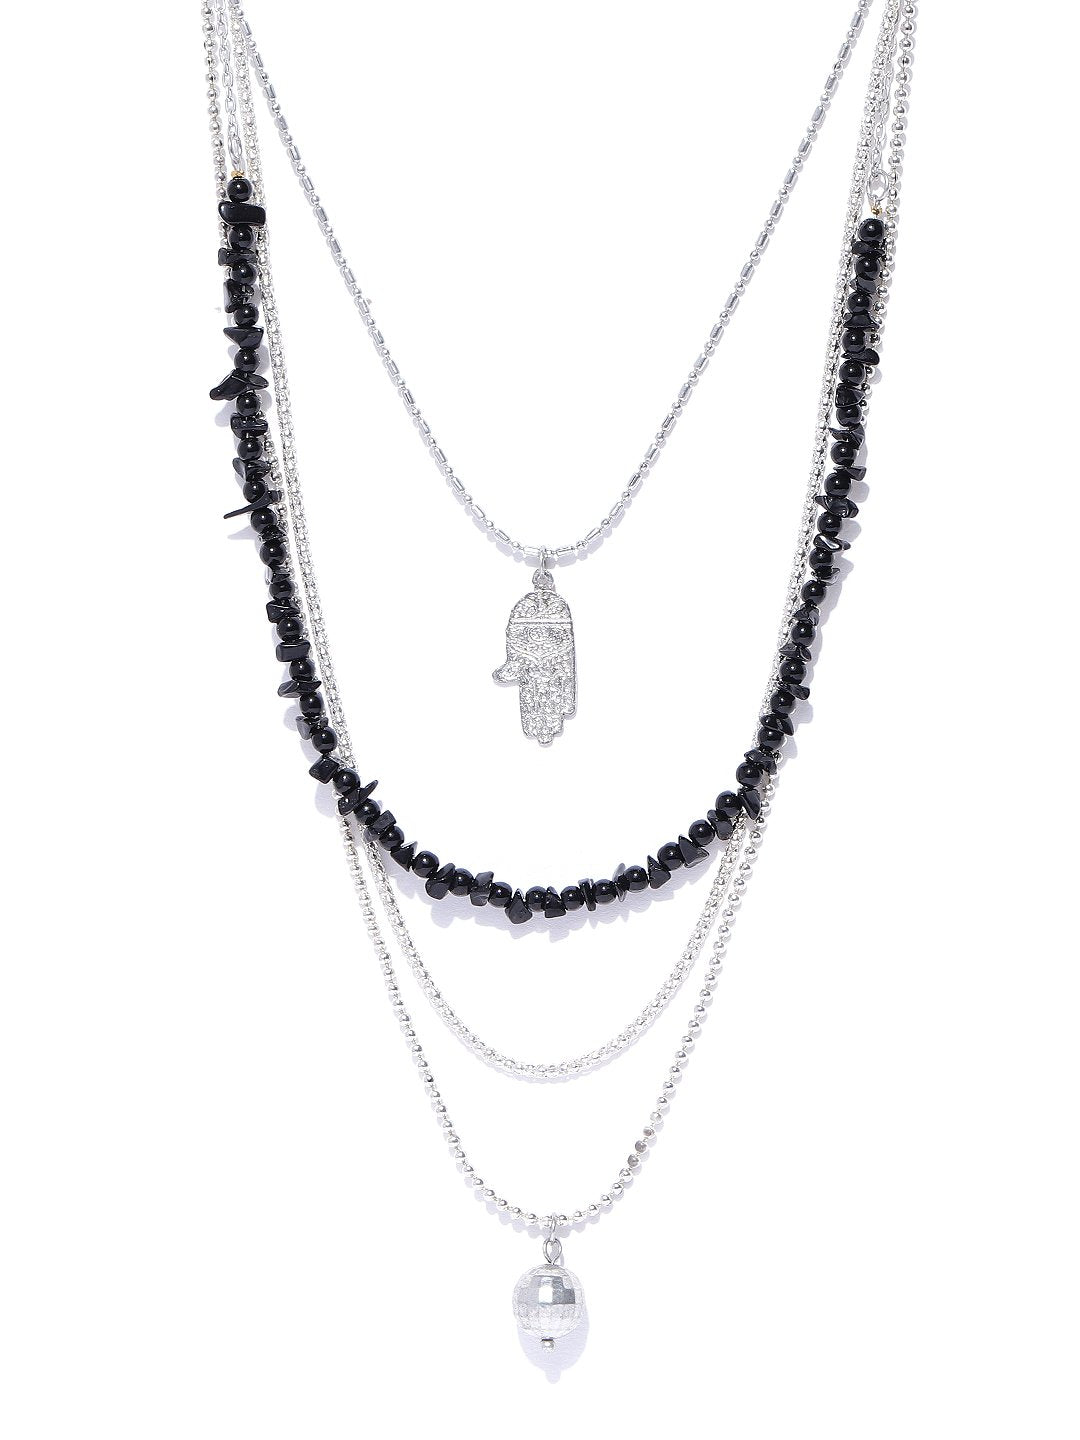 Blueberry silver chain beads detailing necklace